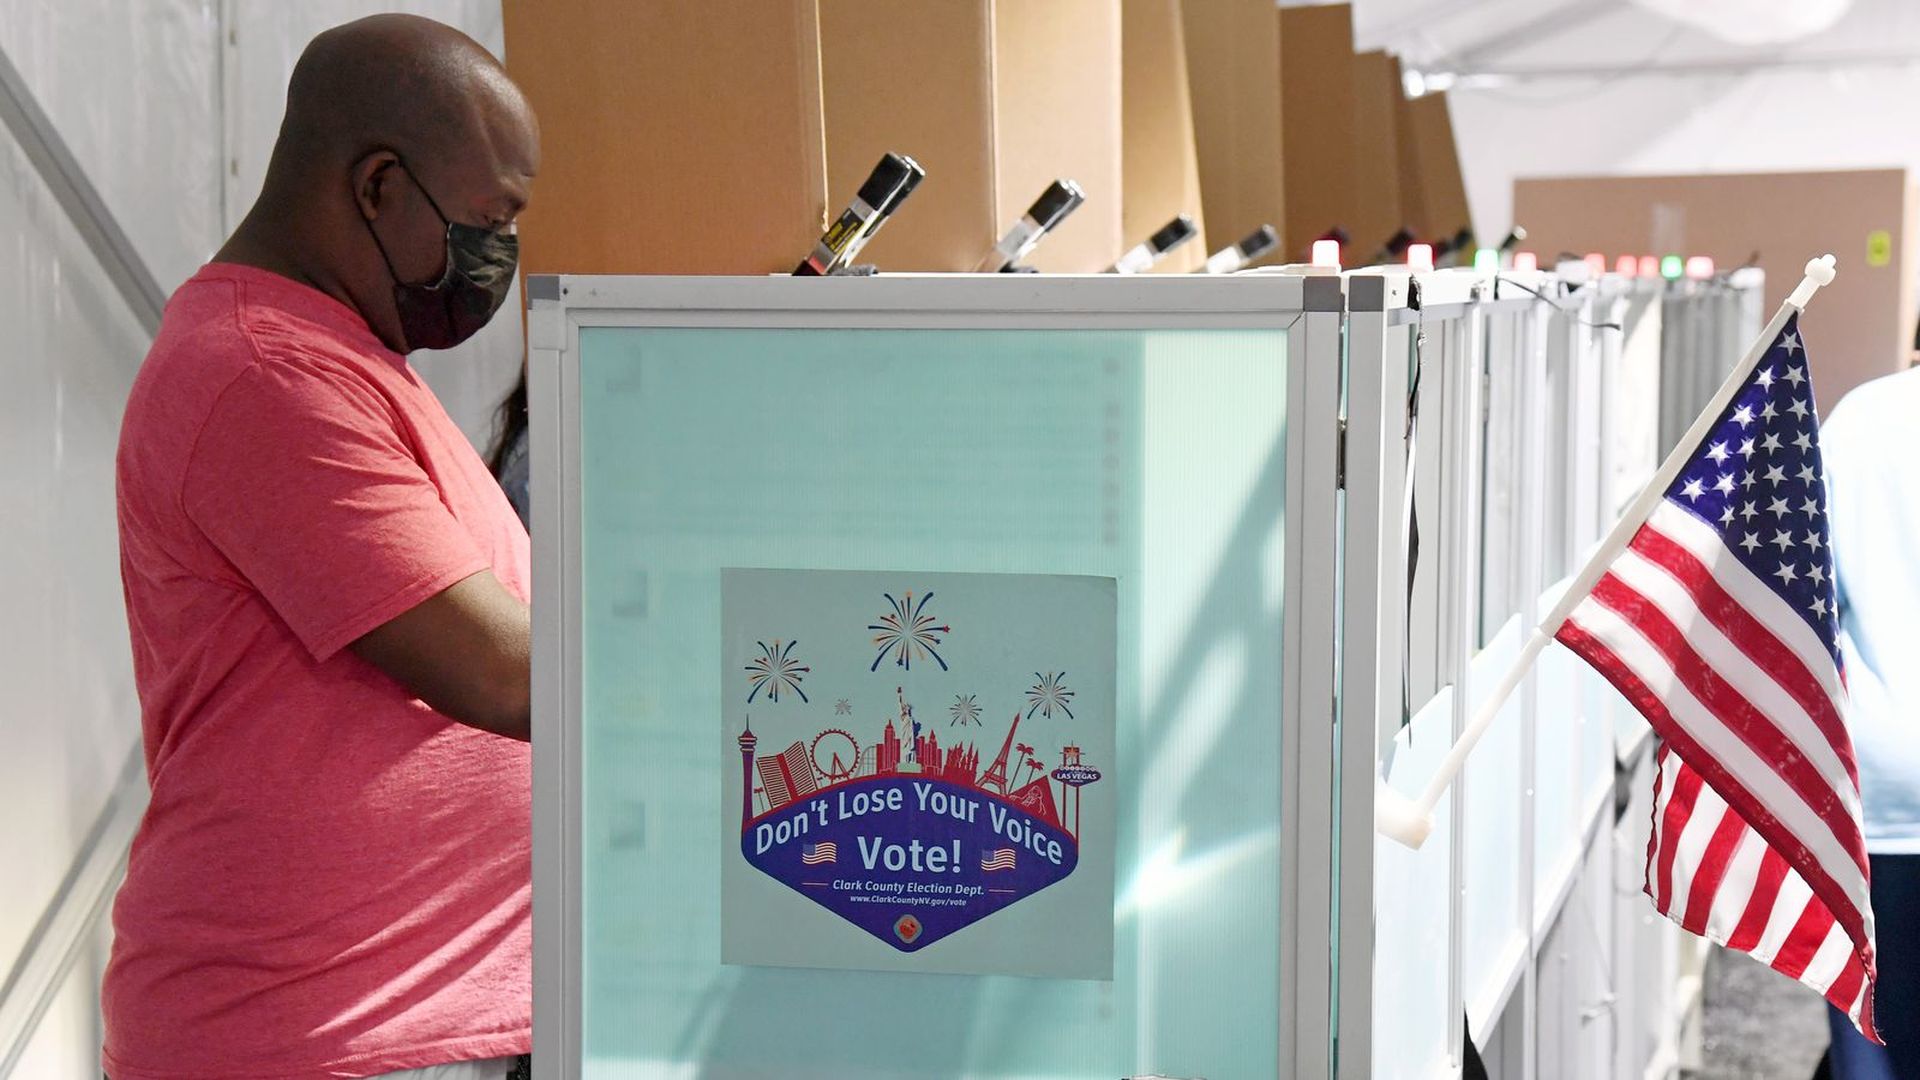 A voter in a coral shirt wearing a mask casts his vote in the 2020 election.